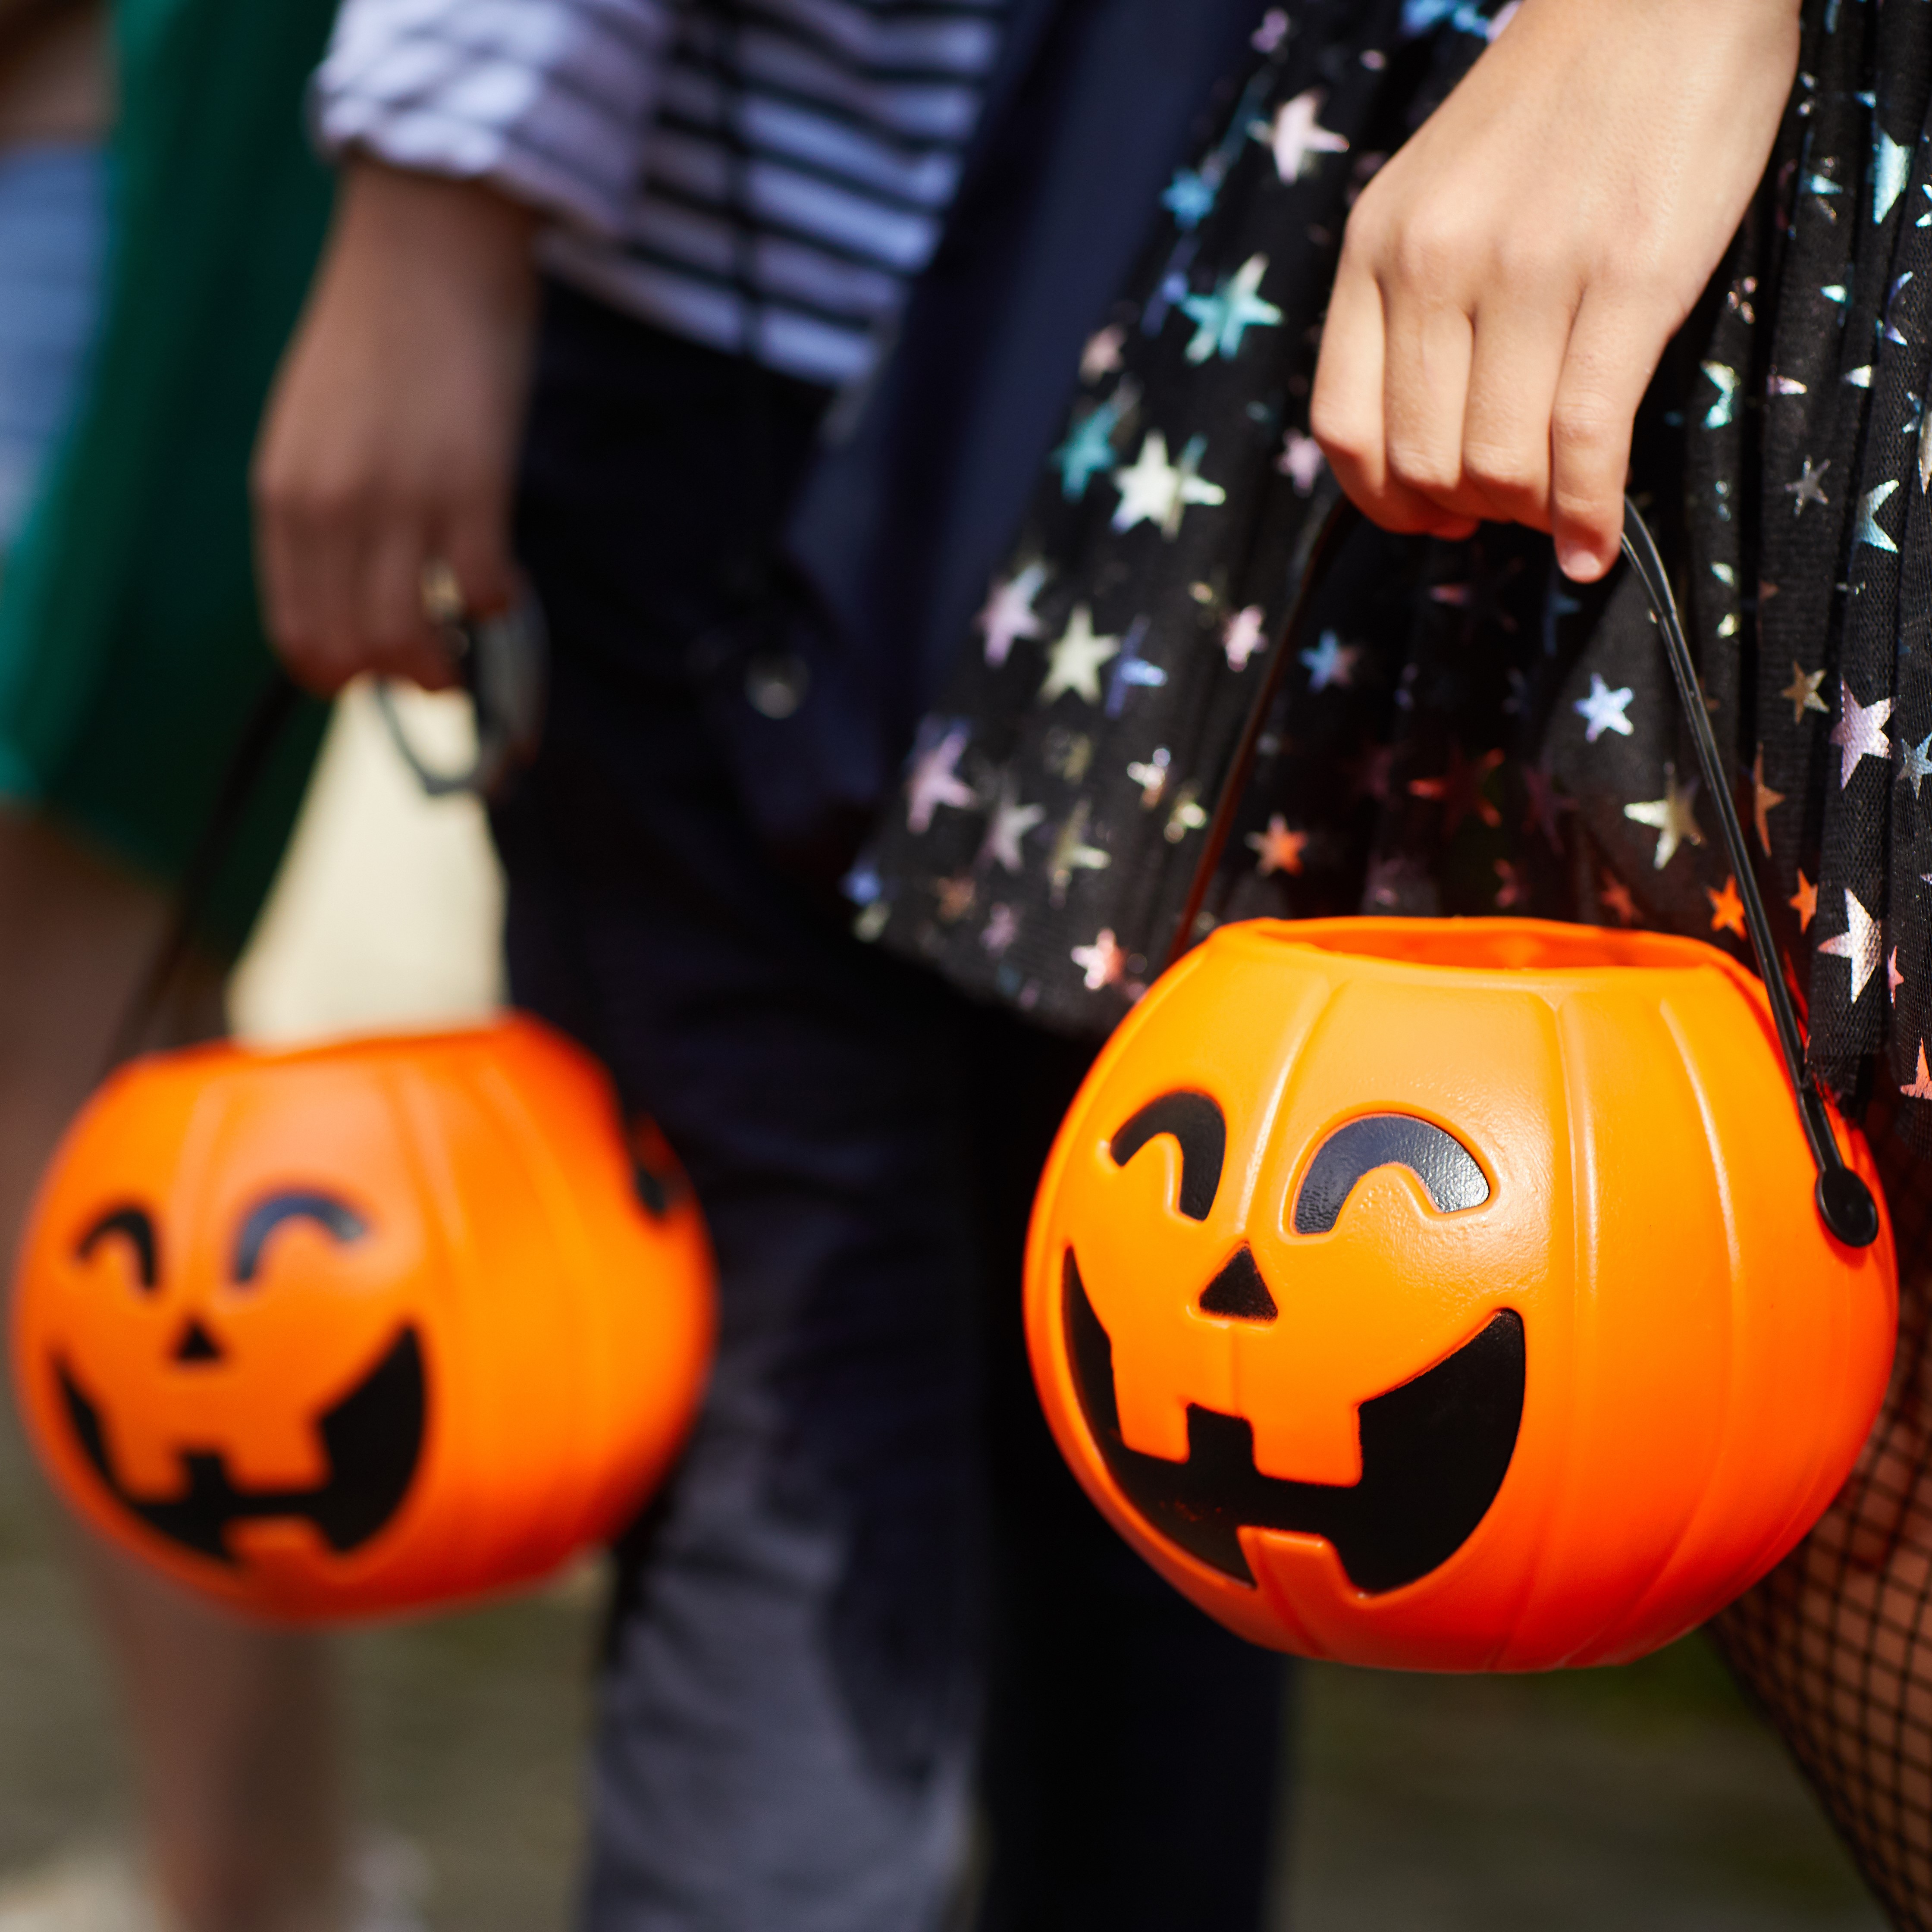 AAA’s Top Tips for a Safe Halloween